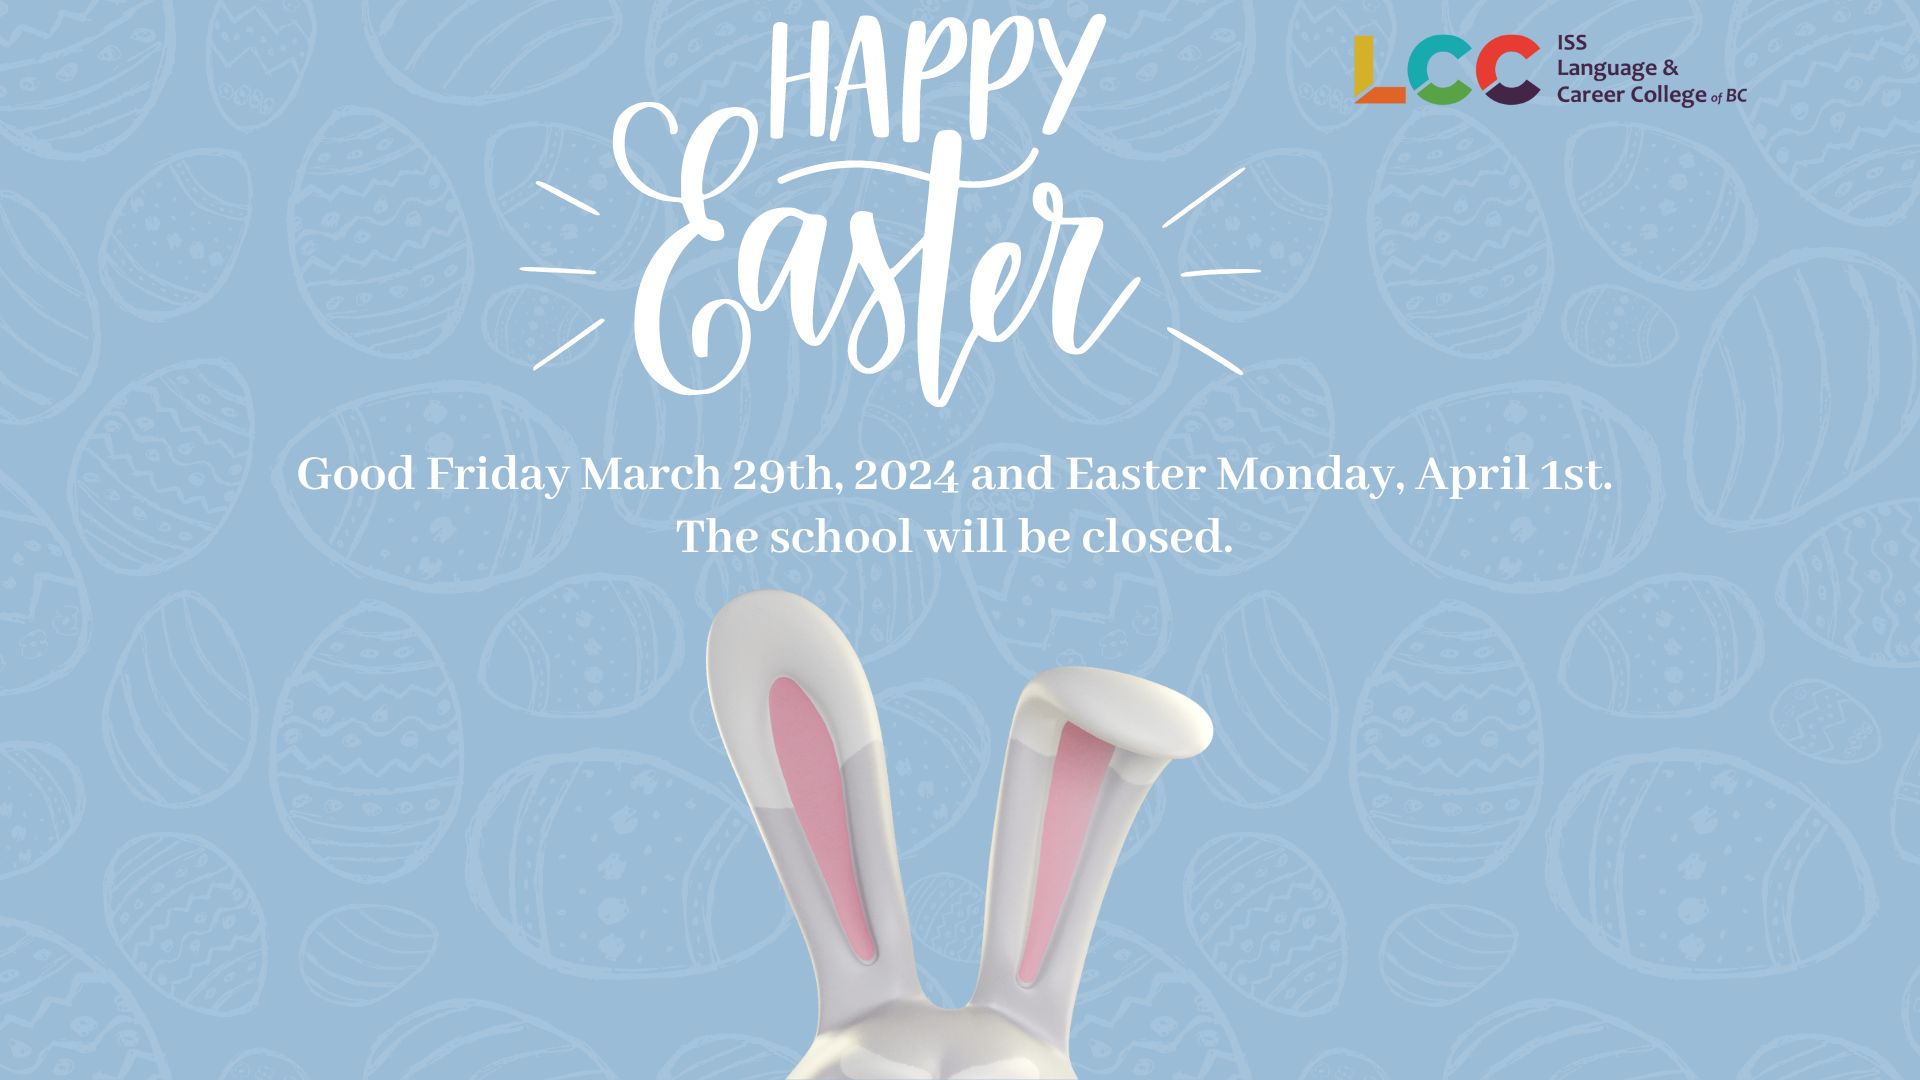 Happy Easter. The school will be closed.